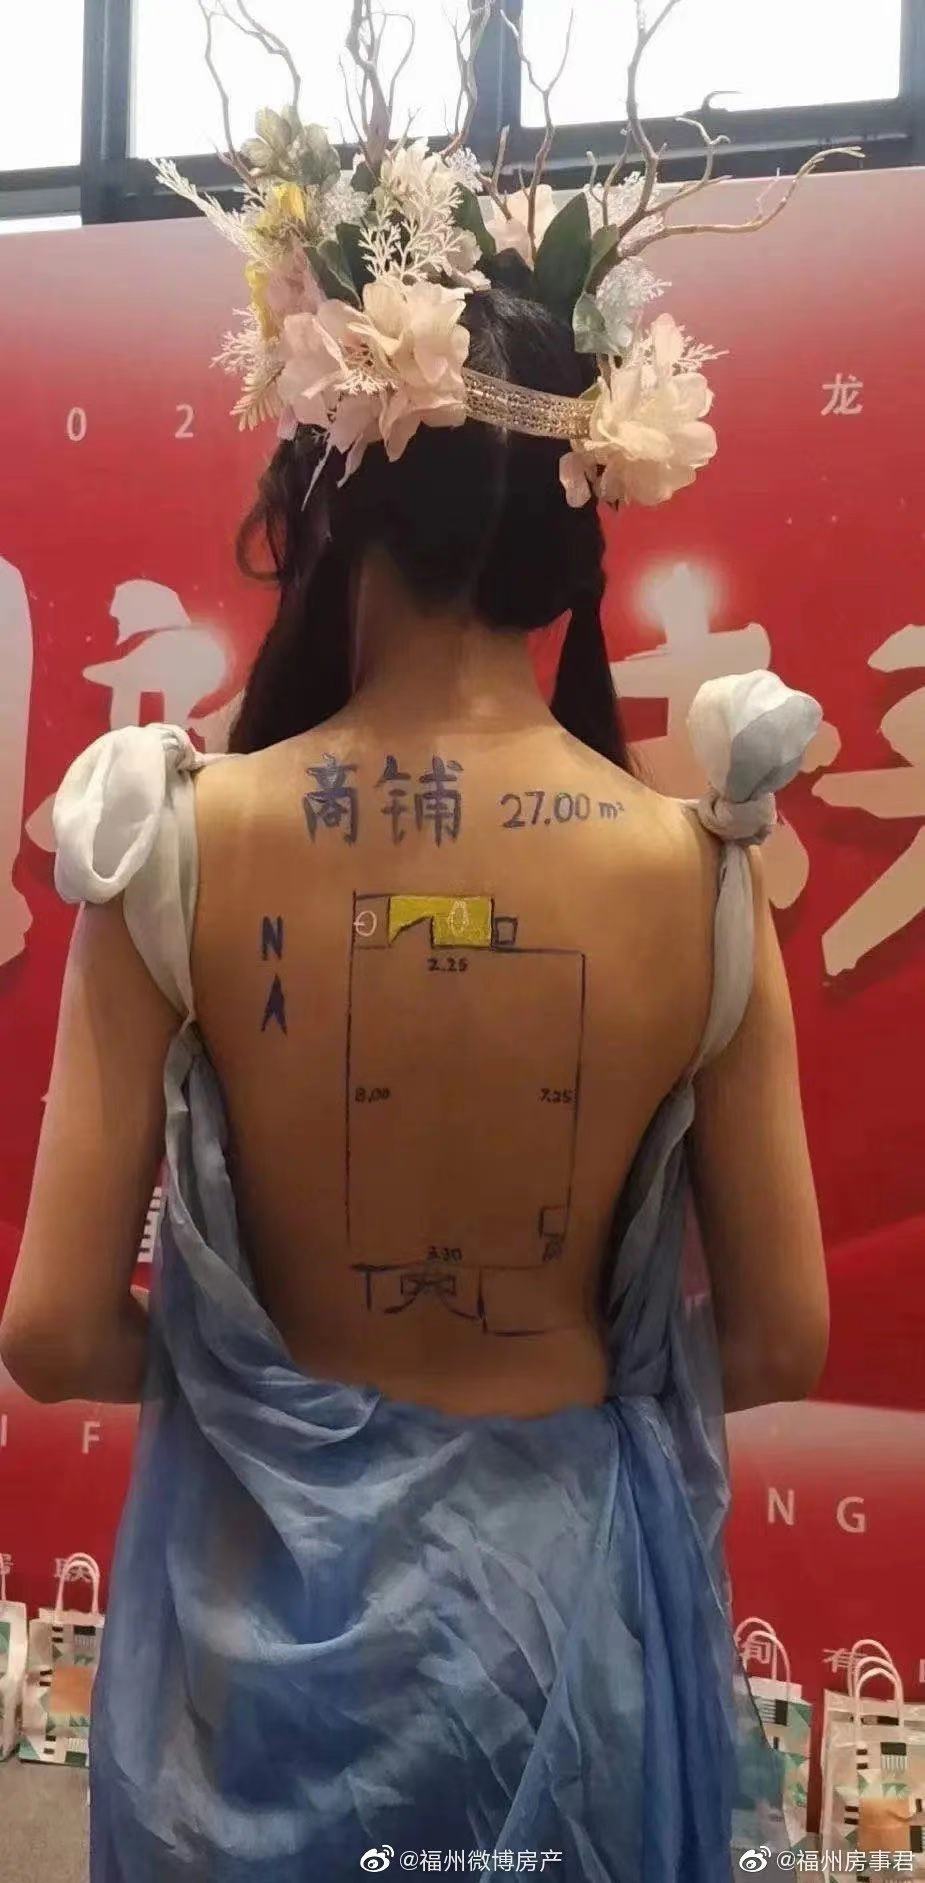 A real estate agency in Xi'an, Northwest China's Shaanxi Province, has sparked heated debate among Chinese netizens after displaying house plans on the backs of female models at a promotional event. Photo: Sina Weibo